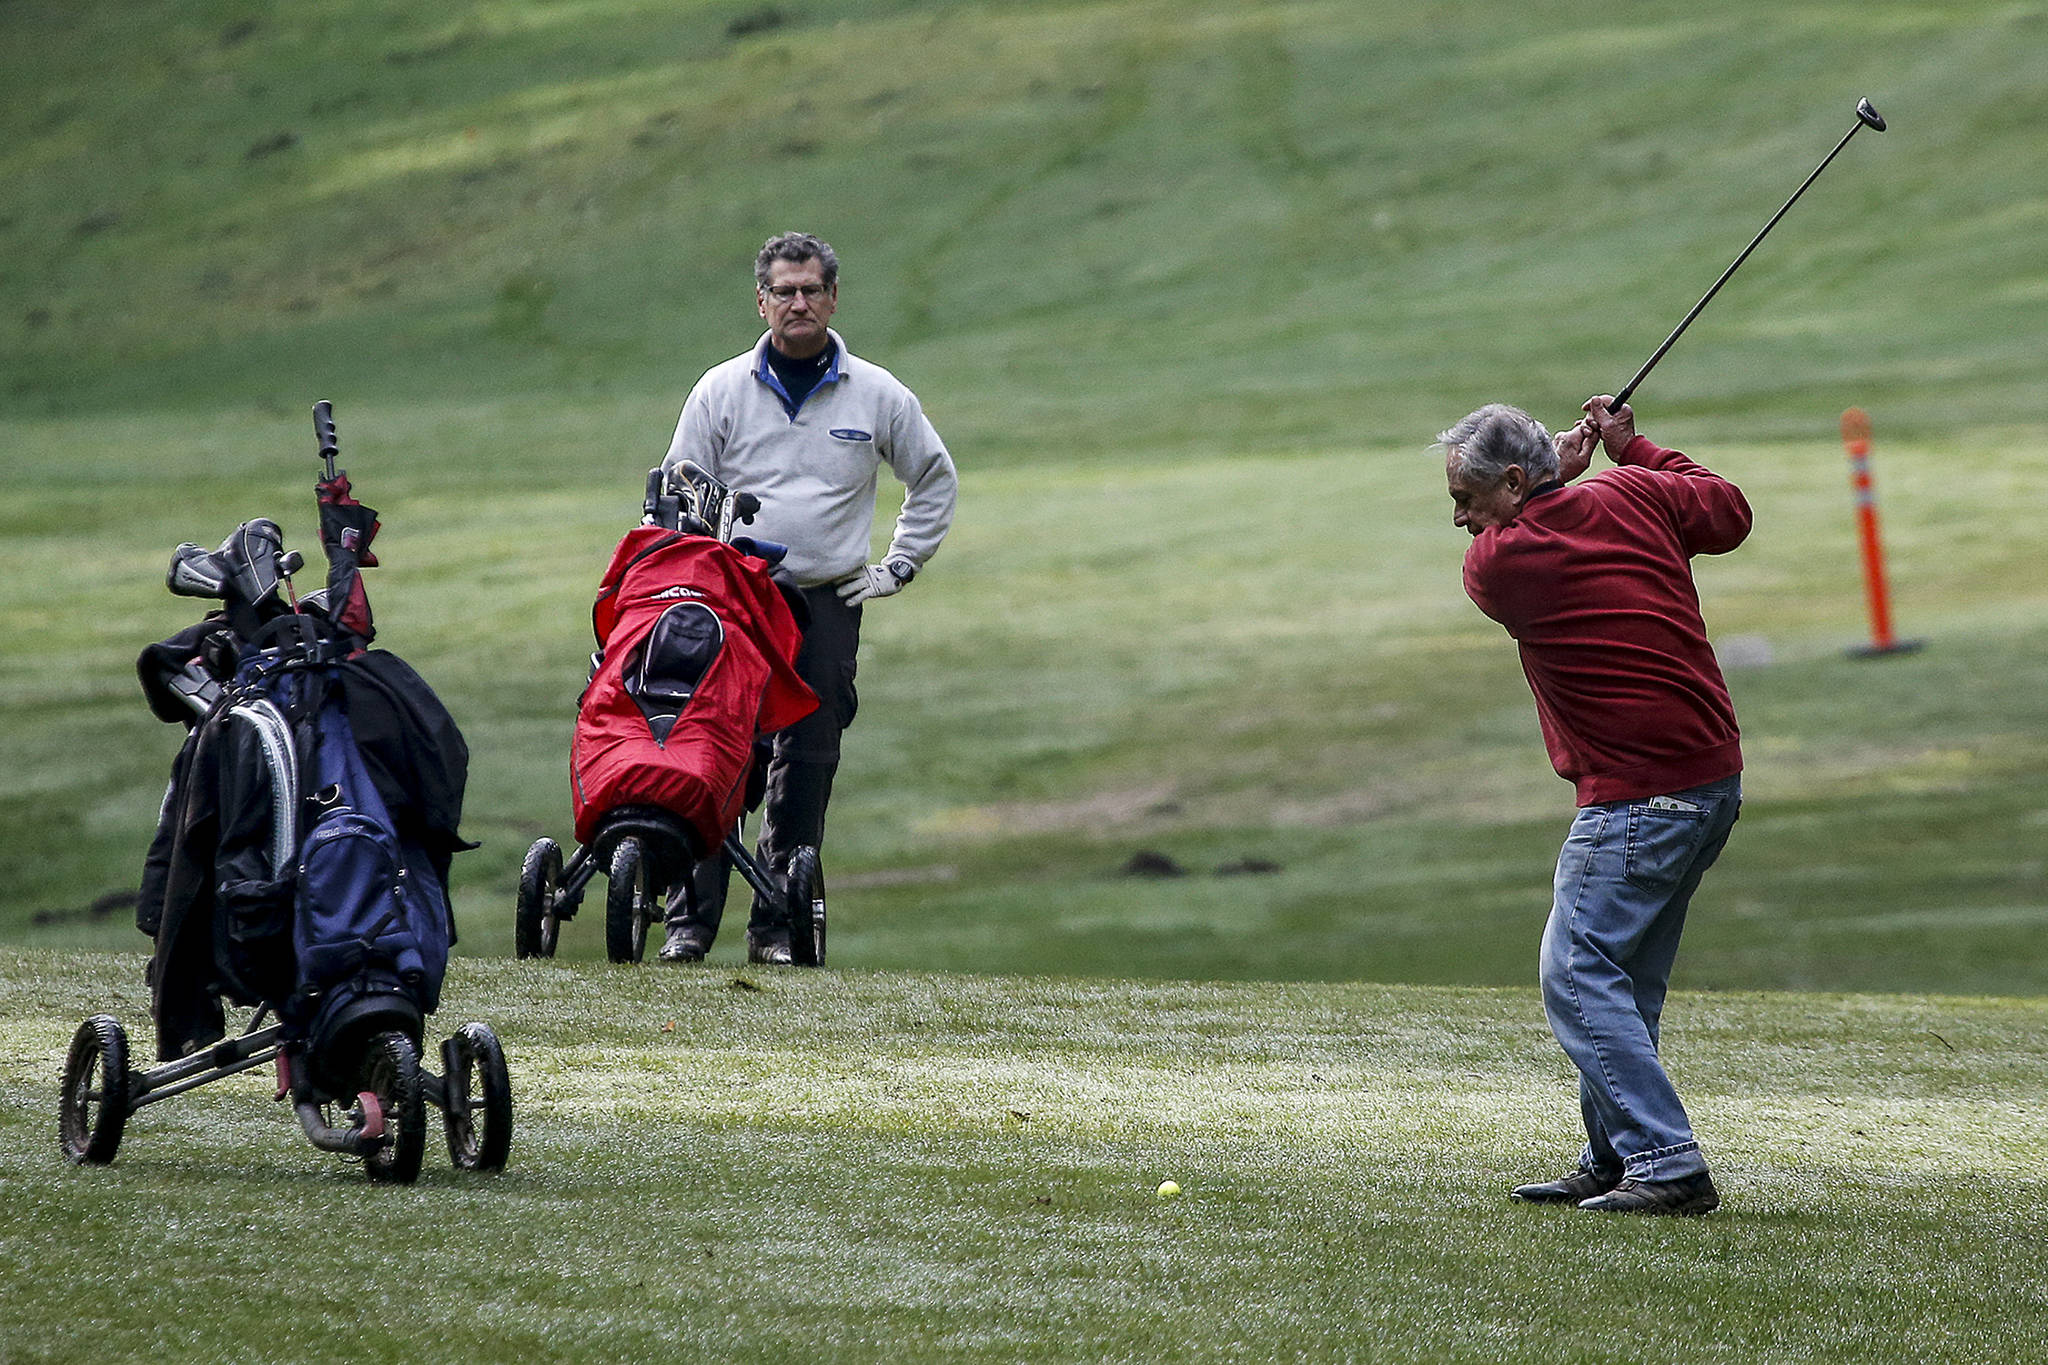 Ray Weis (right) takes a swing while golfing with friend Jim Fenton at the Kayak Point Golf Course in 2018. (Ian Terry / Herald file)